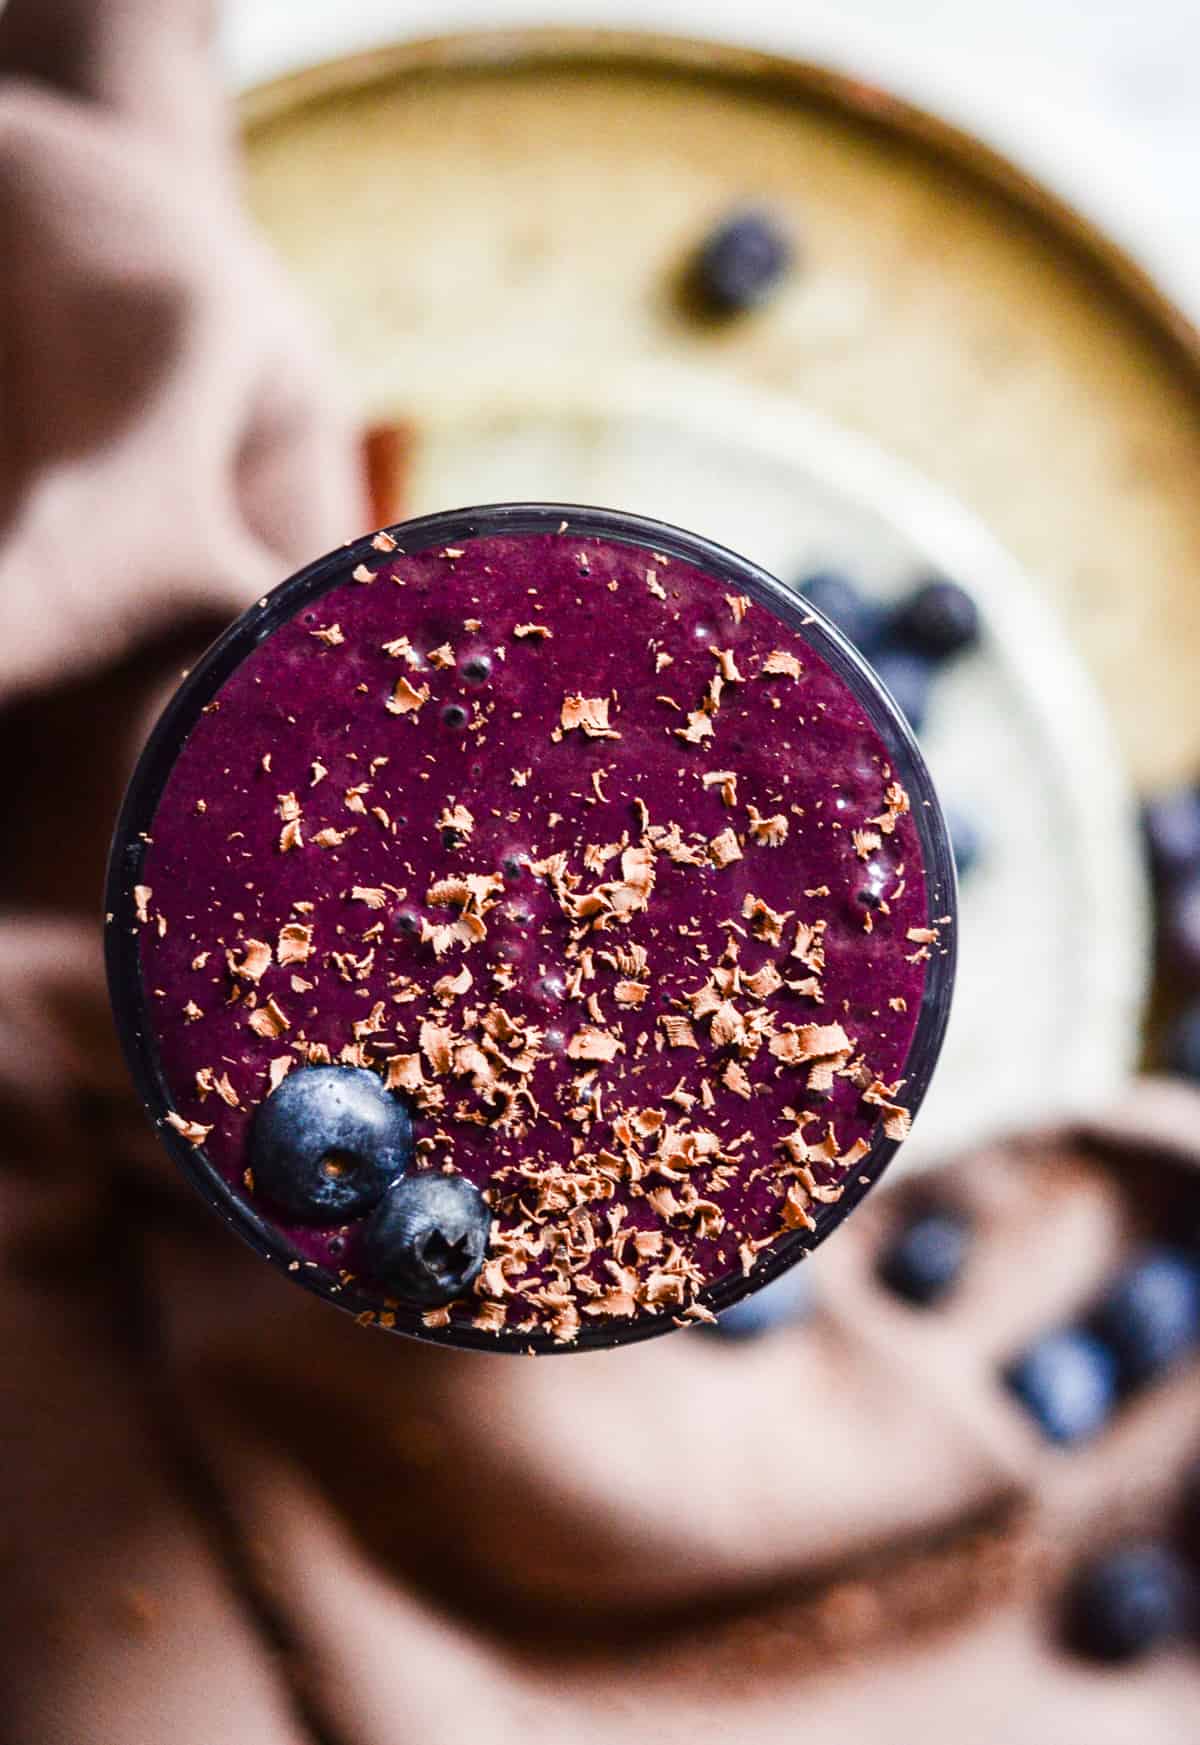 Flat lay of a purple smoothie with chocolate shavings on top.